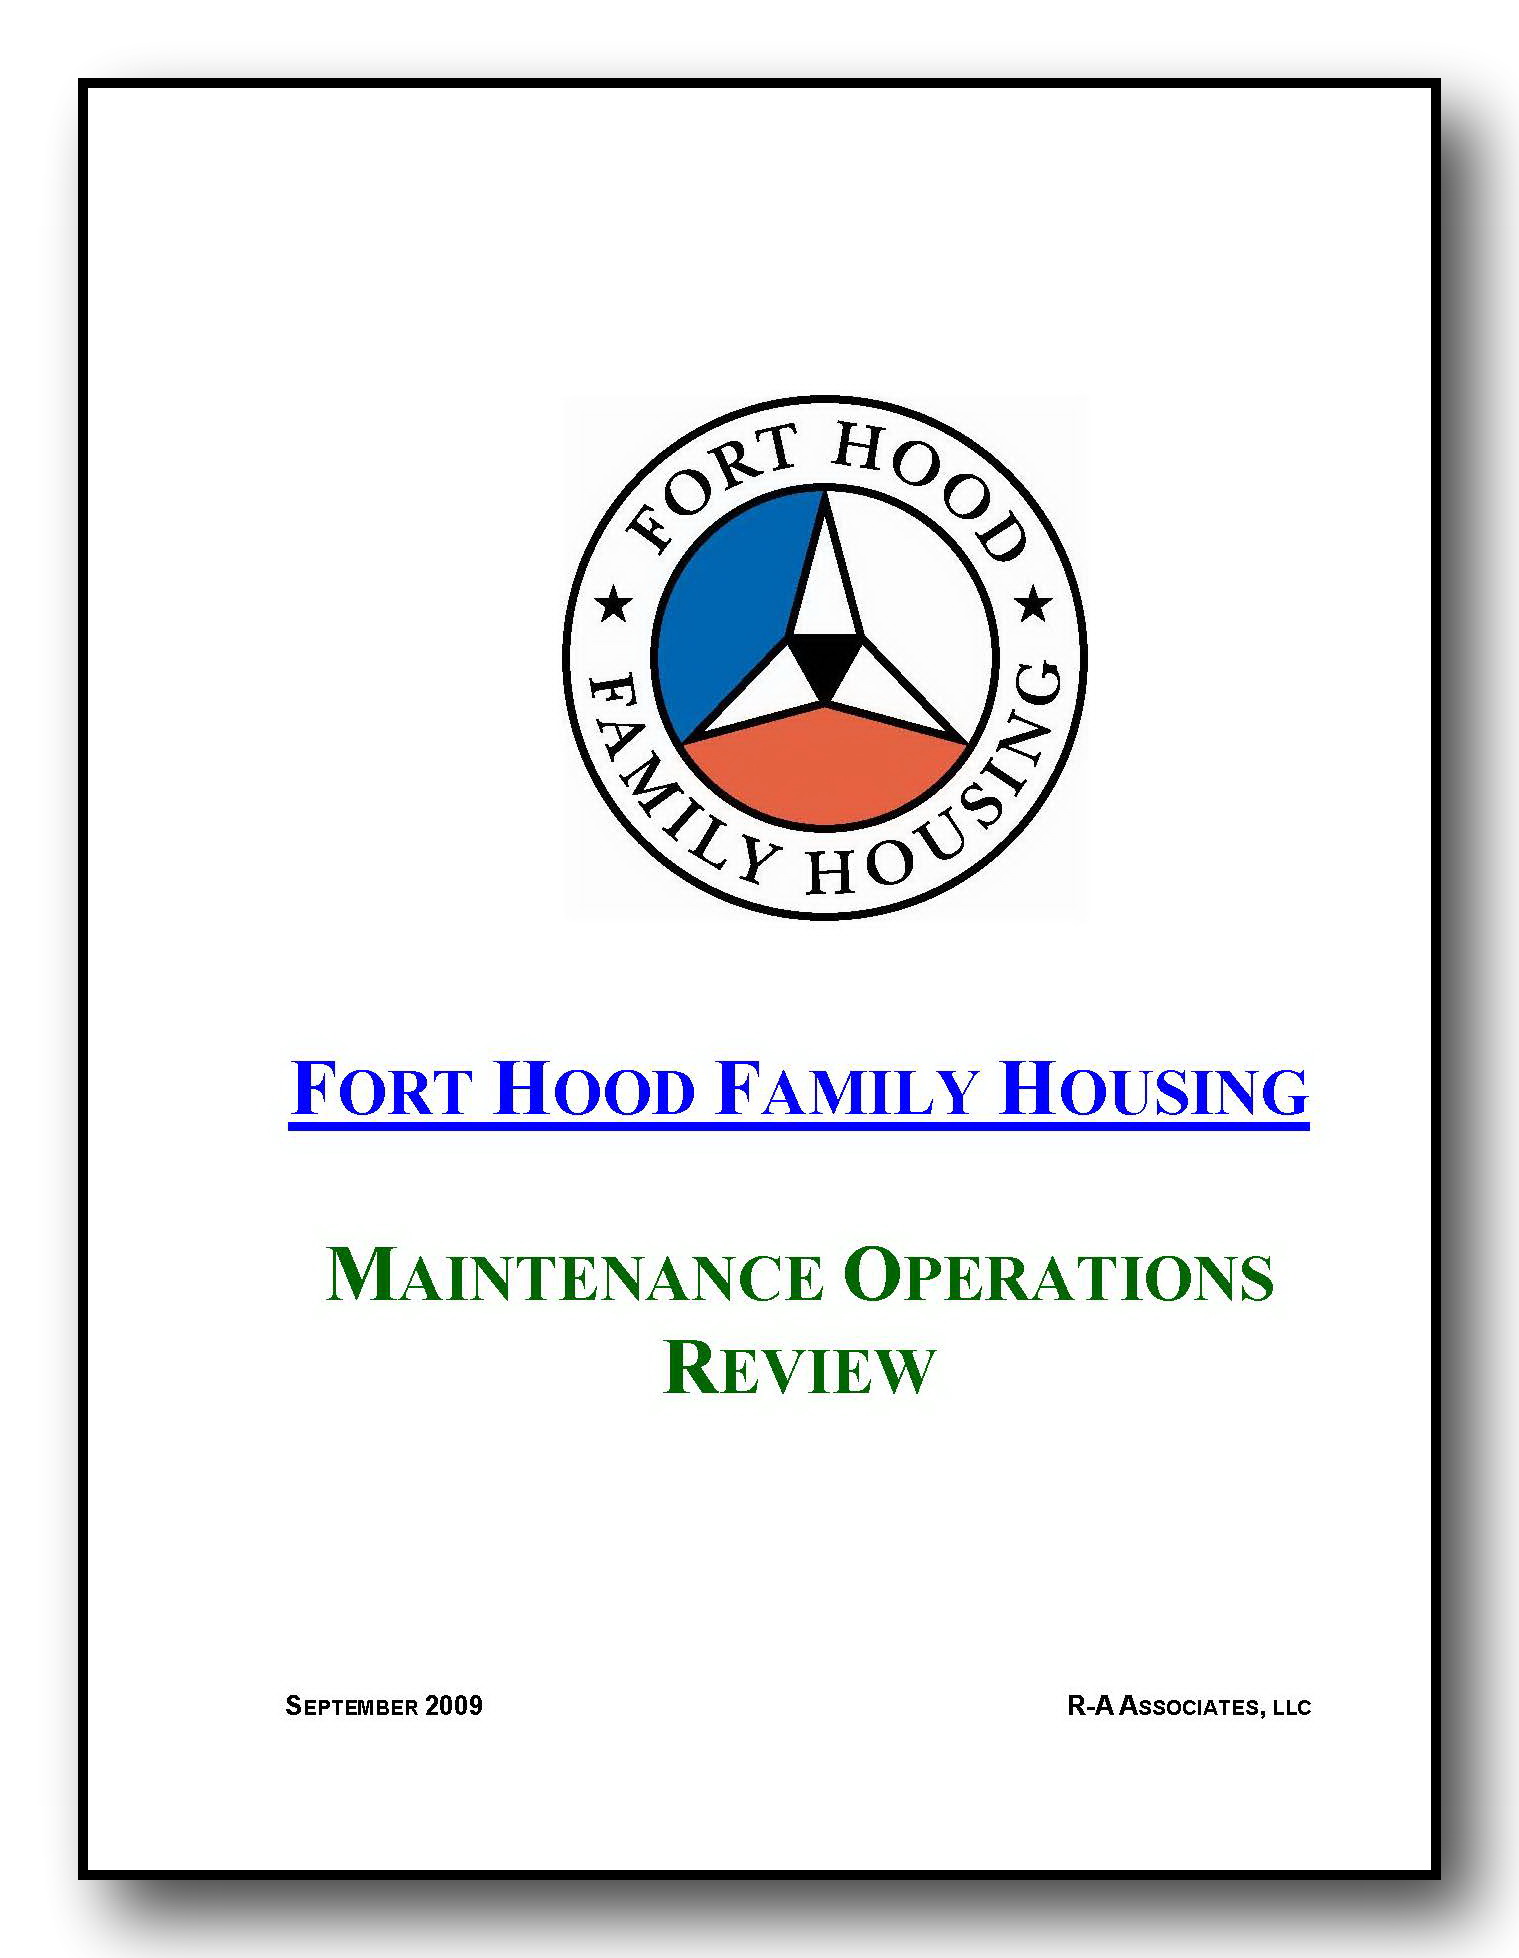 Fort Hood Family Housing Maintenance Operations Review Excerpt_Page_01